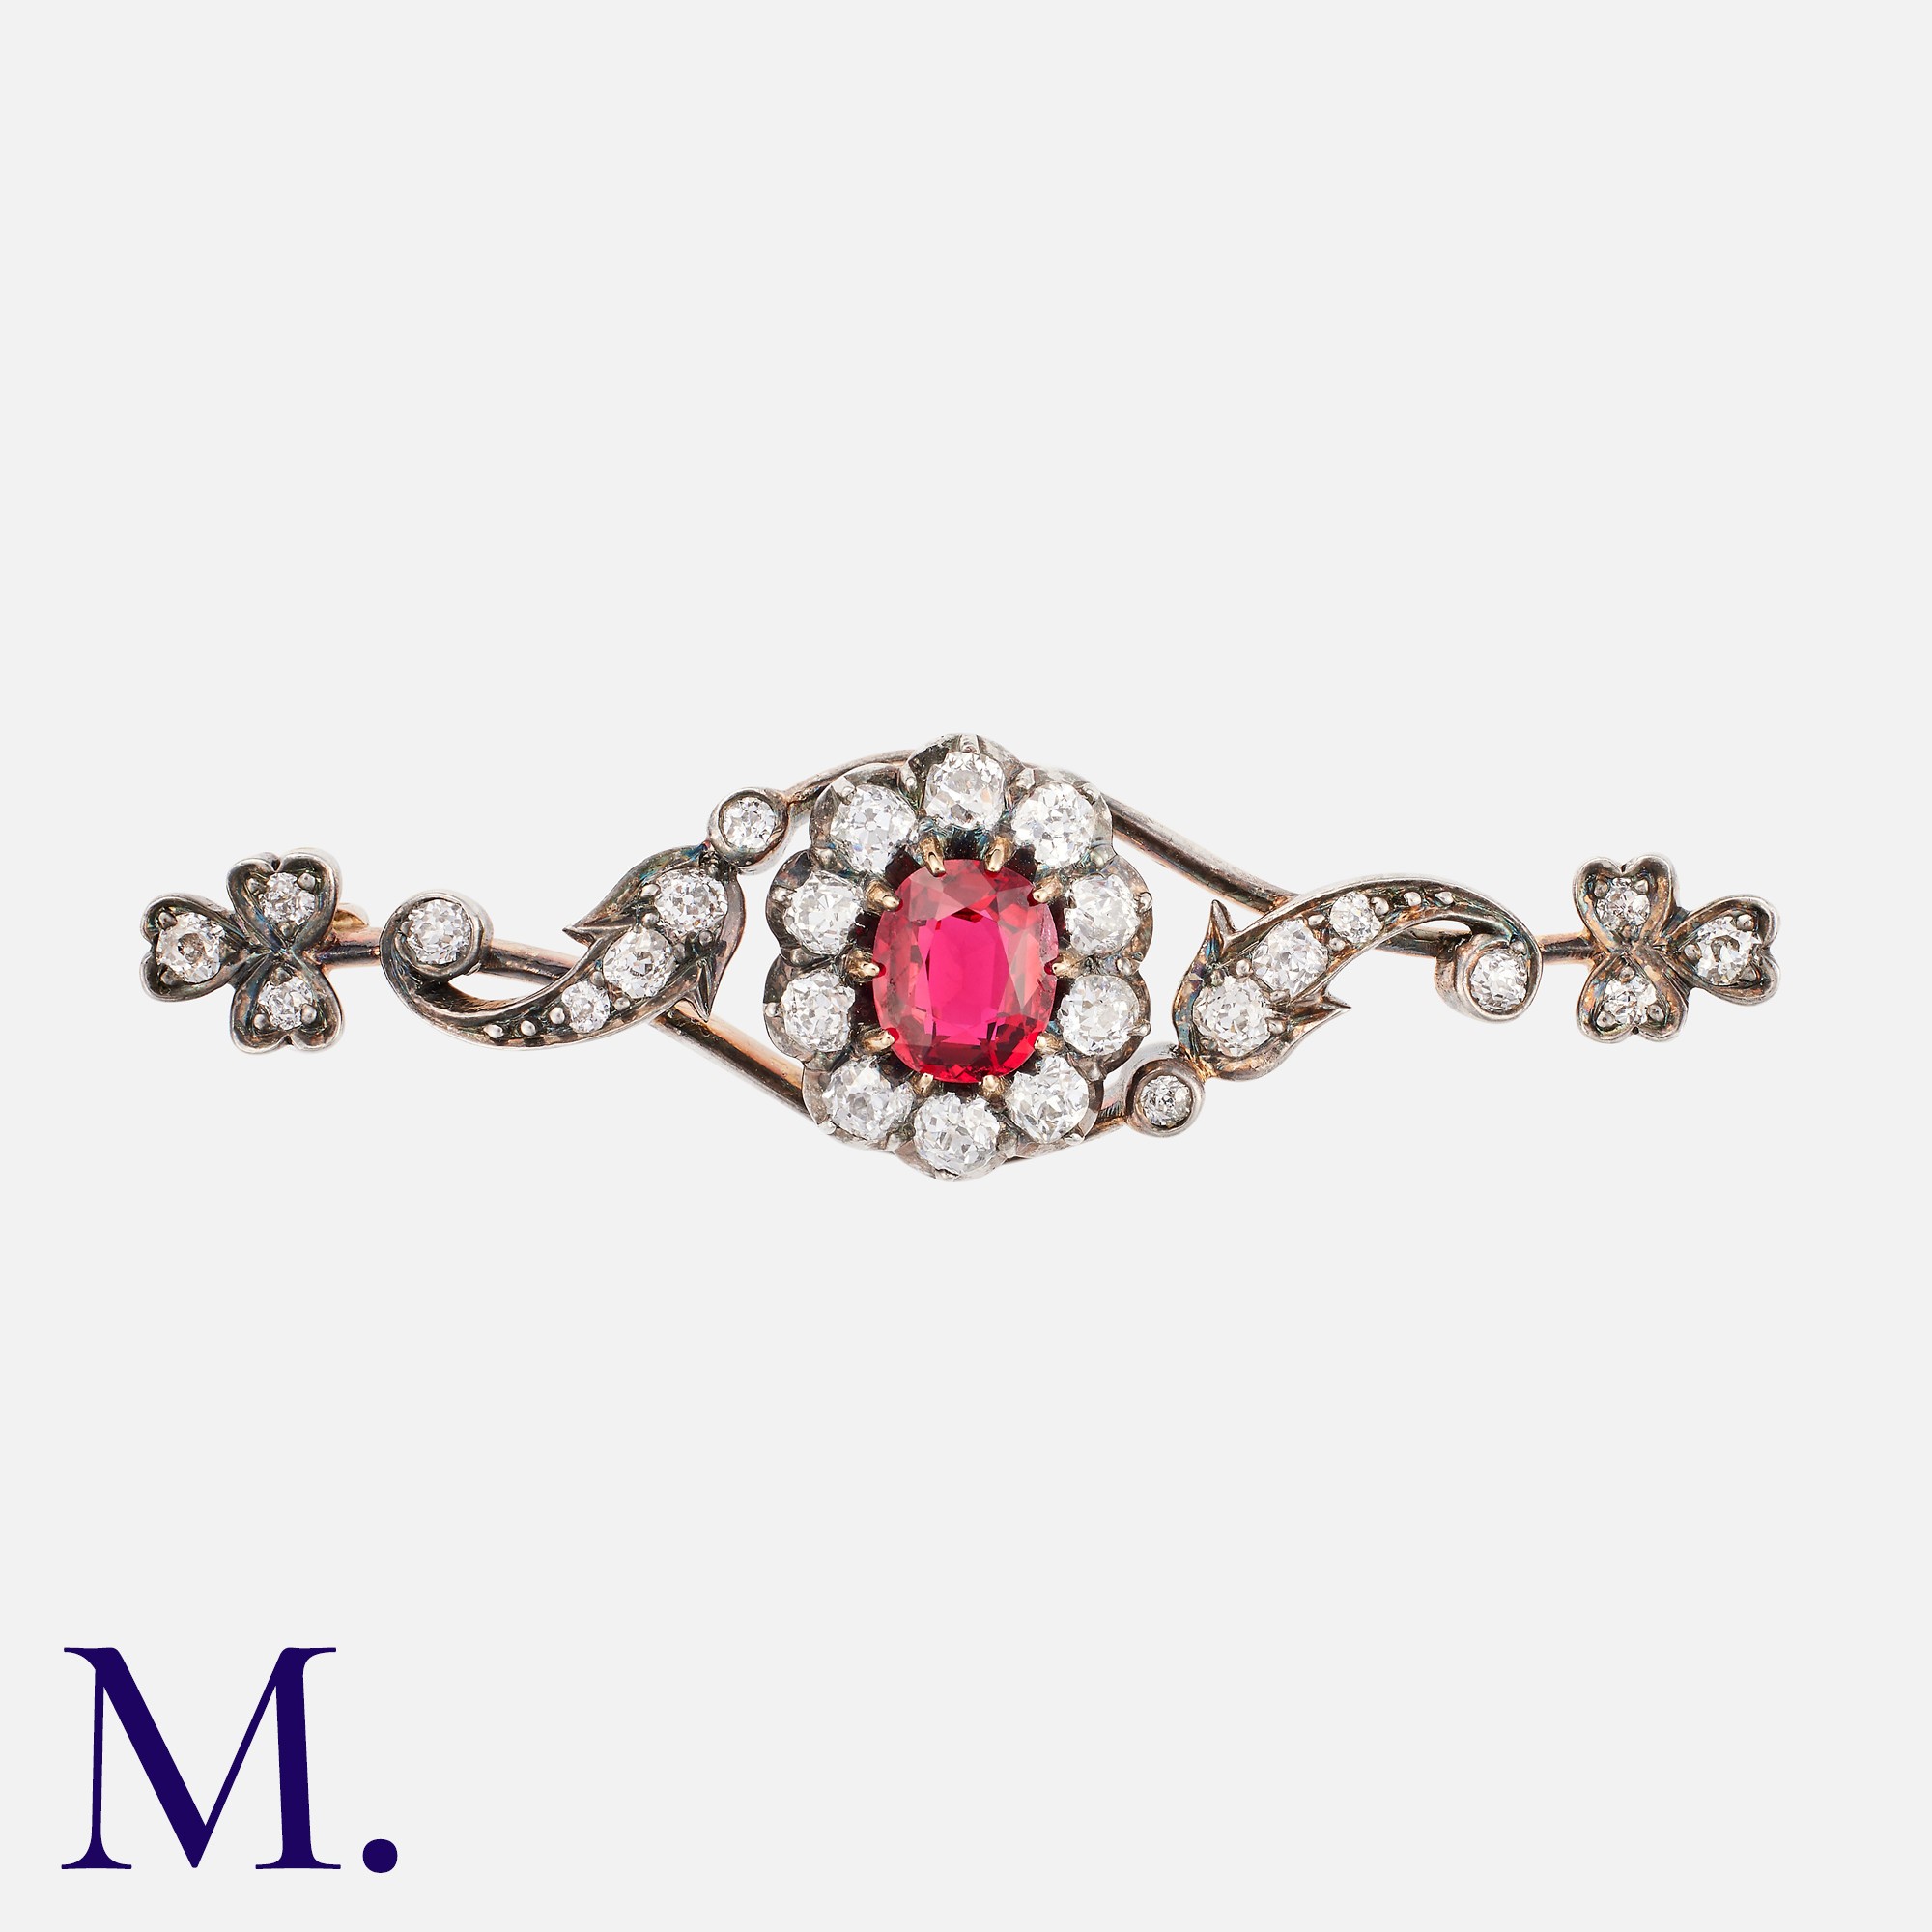 An Antique Spinel & Diamond Bar Brooch in yellow gold and silver, set with a principal oval cut